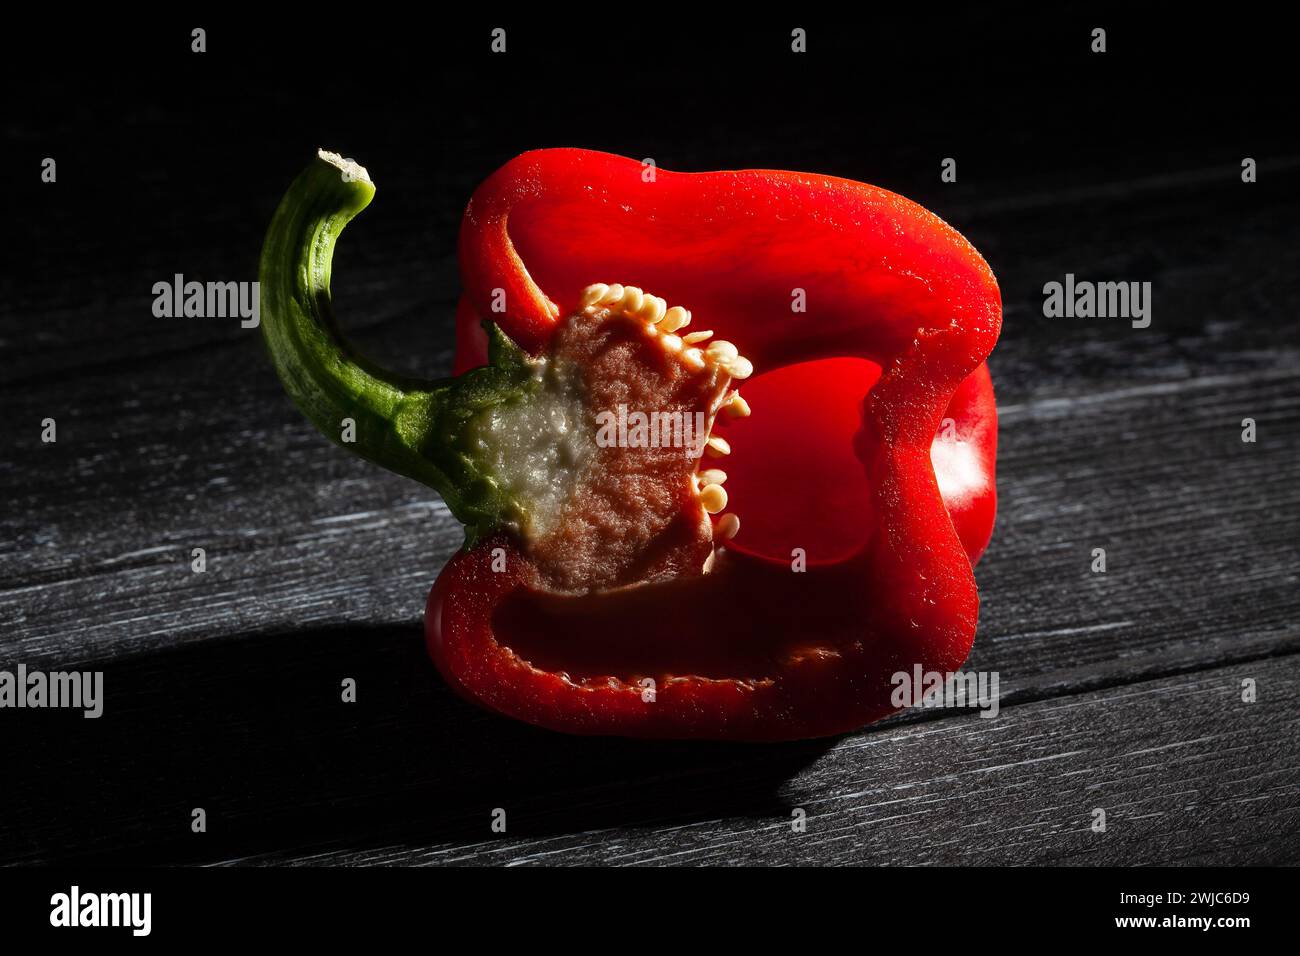 sliced red bell pepper on black wood background Stock Photo